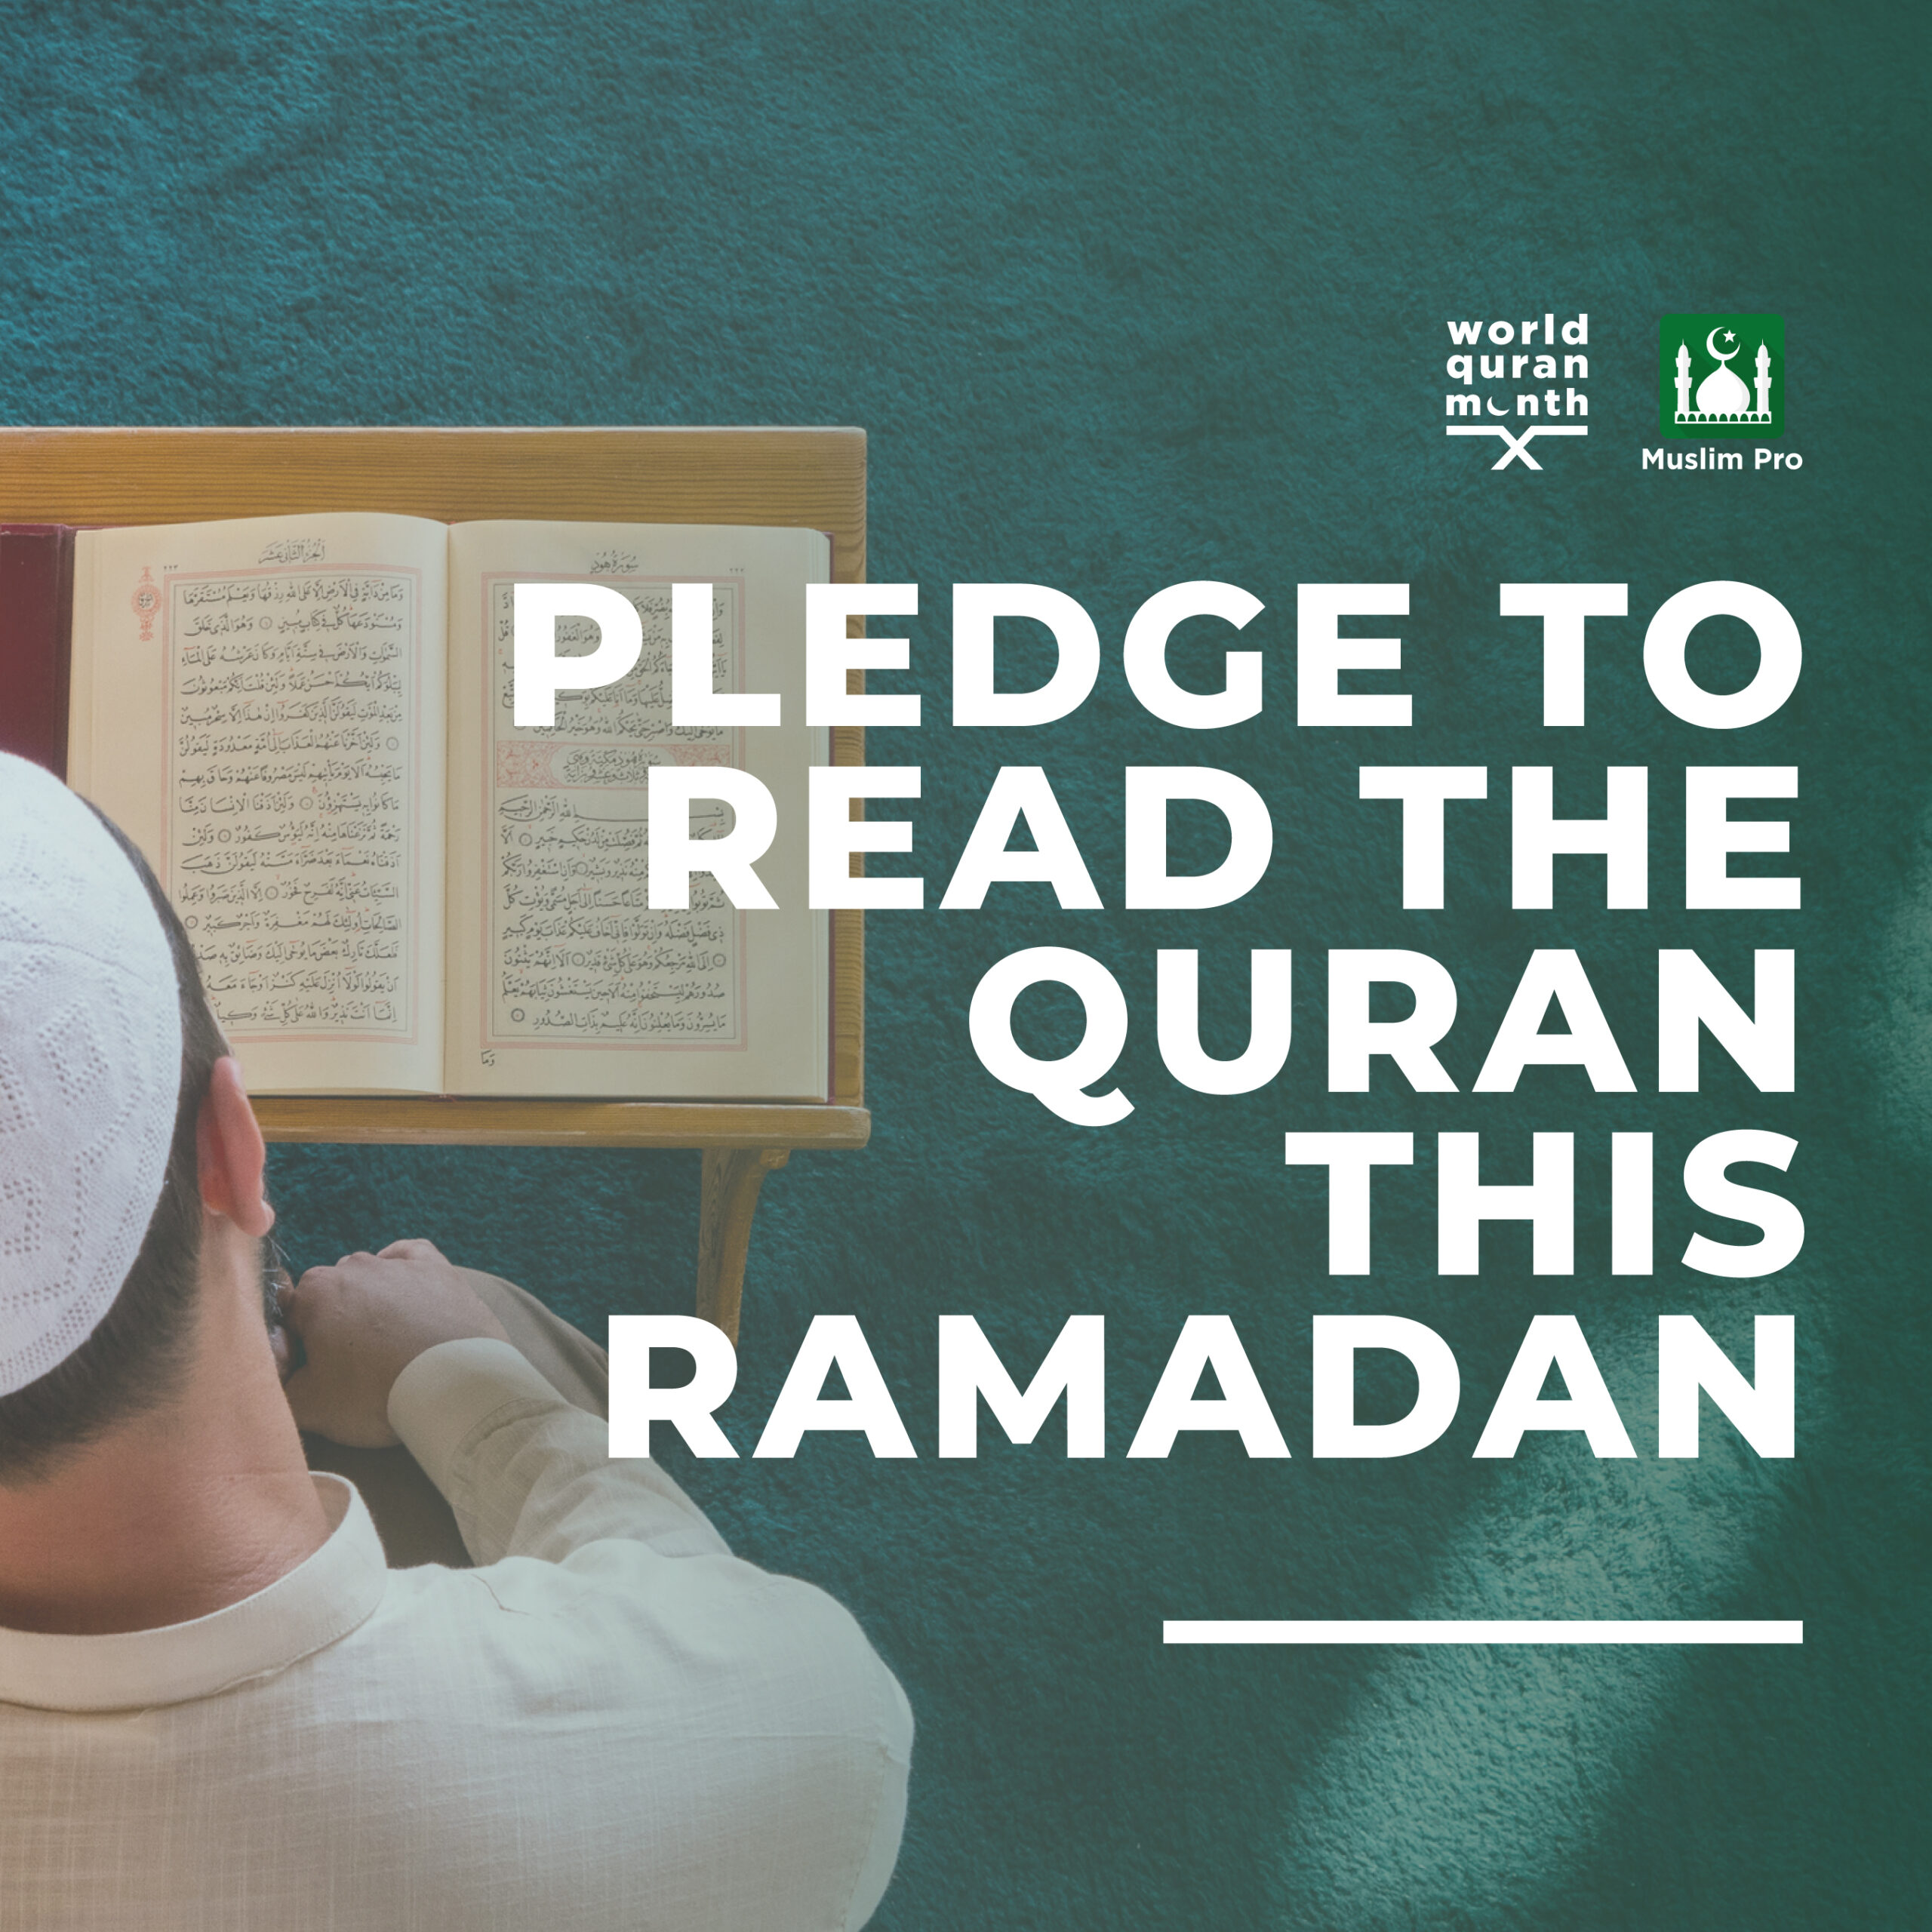 Muslim Pro Aims For World’s Largest Quran Movement This Ramadan